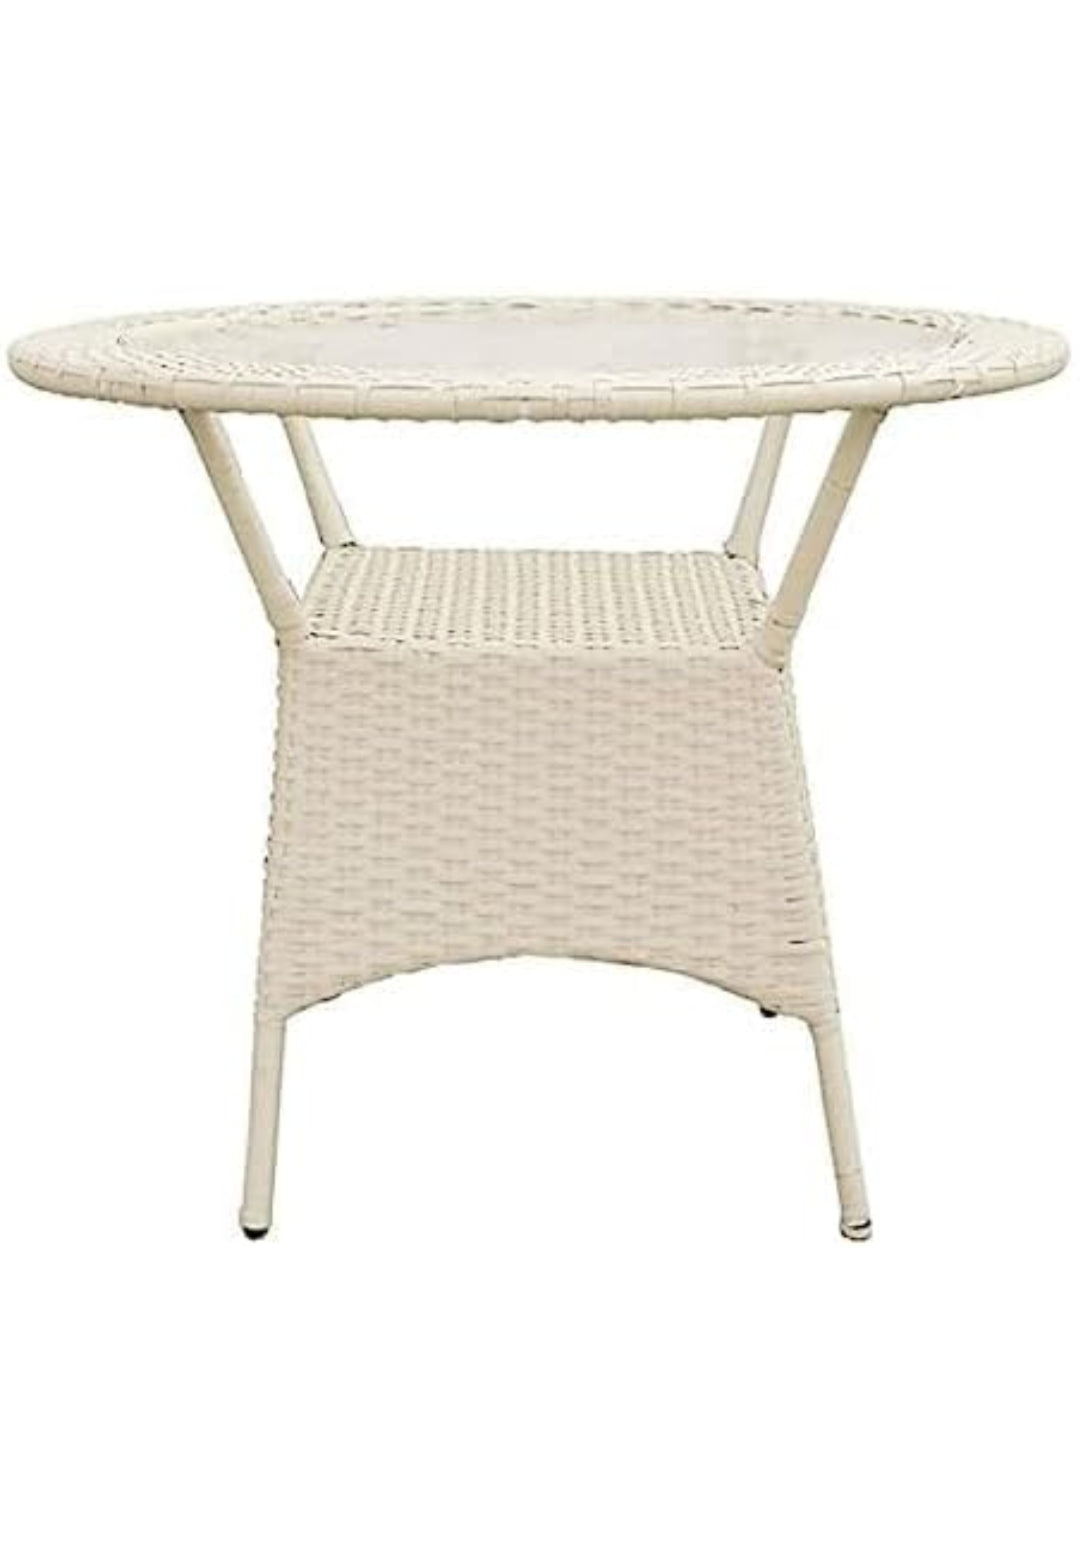 Outdoor Chair Set D-8 White Color